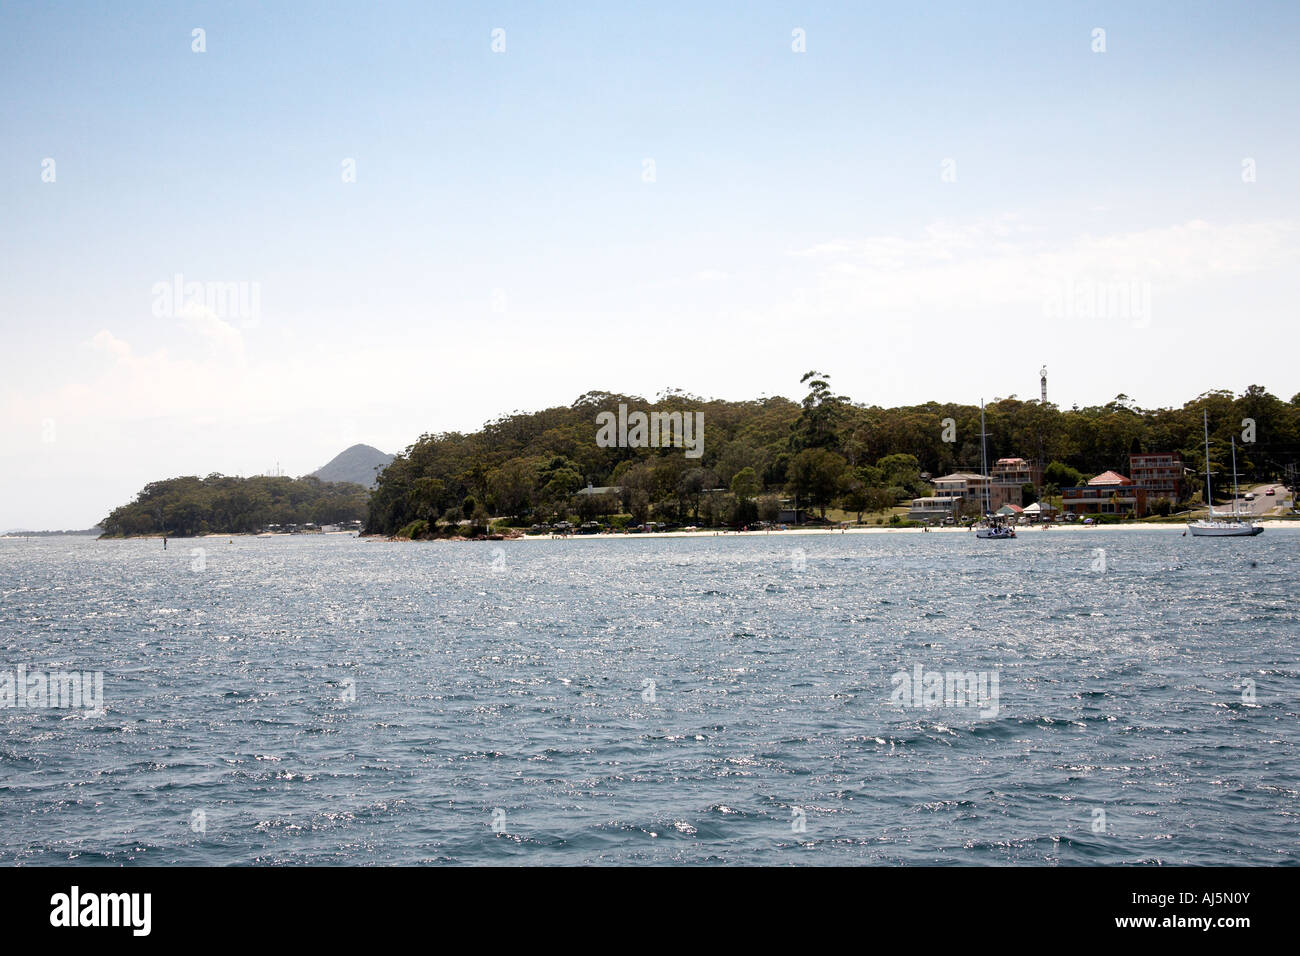 Town of Nelson Bay from across water in Port Stephens New South Wales NSW Australia Stock Photo